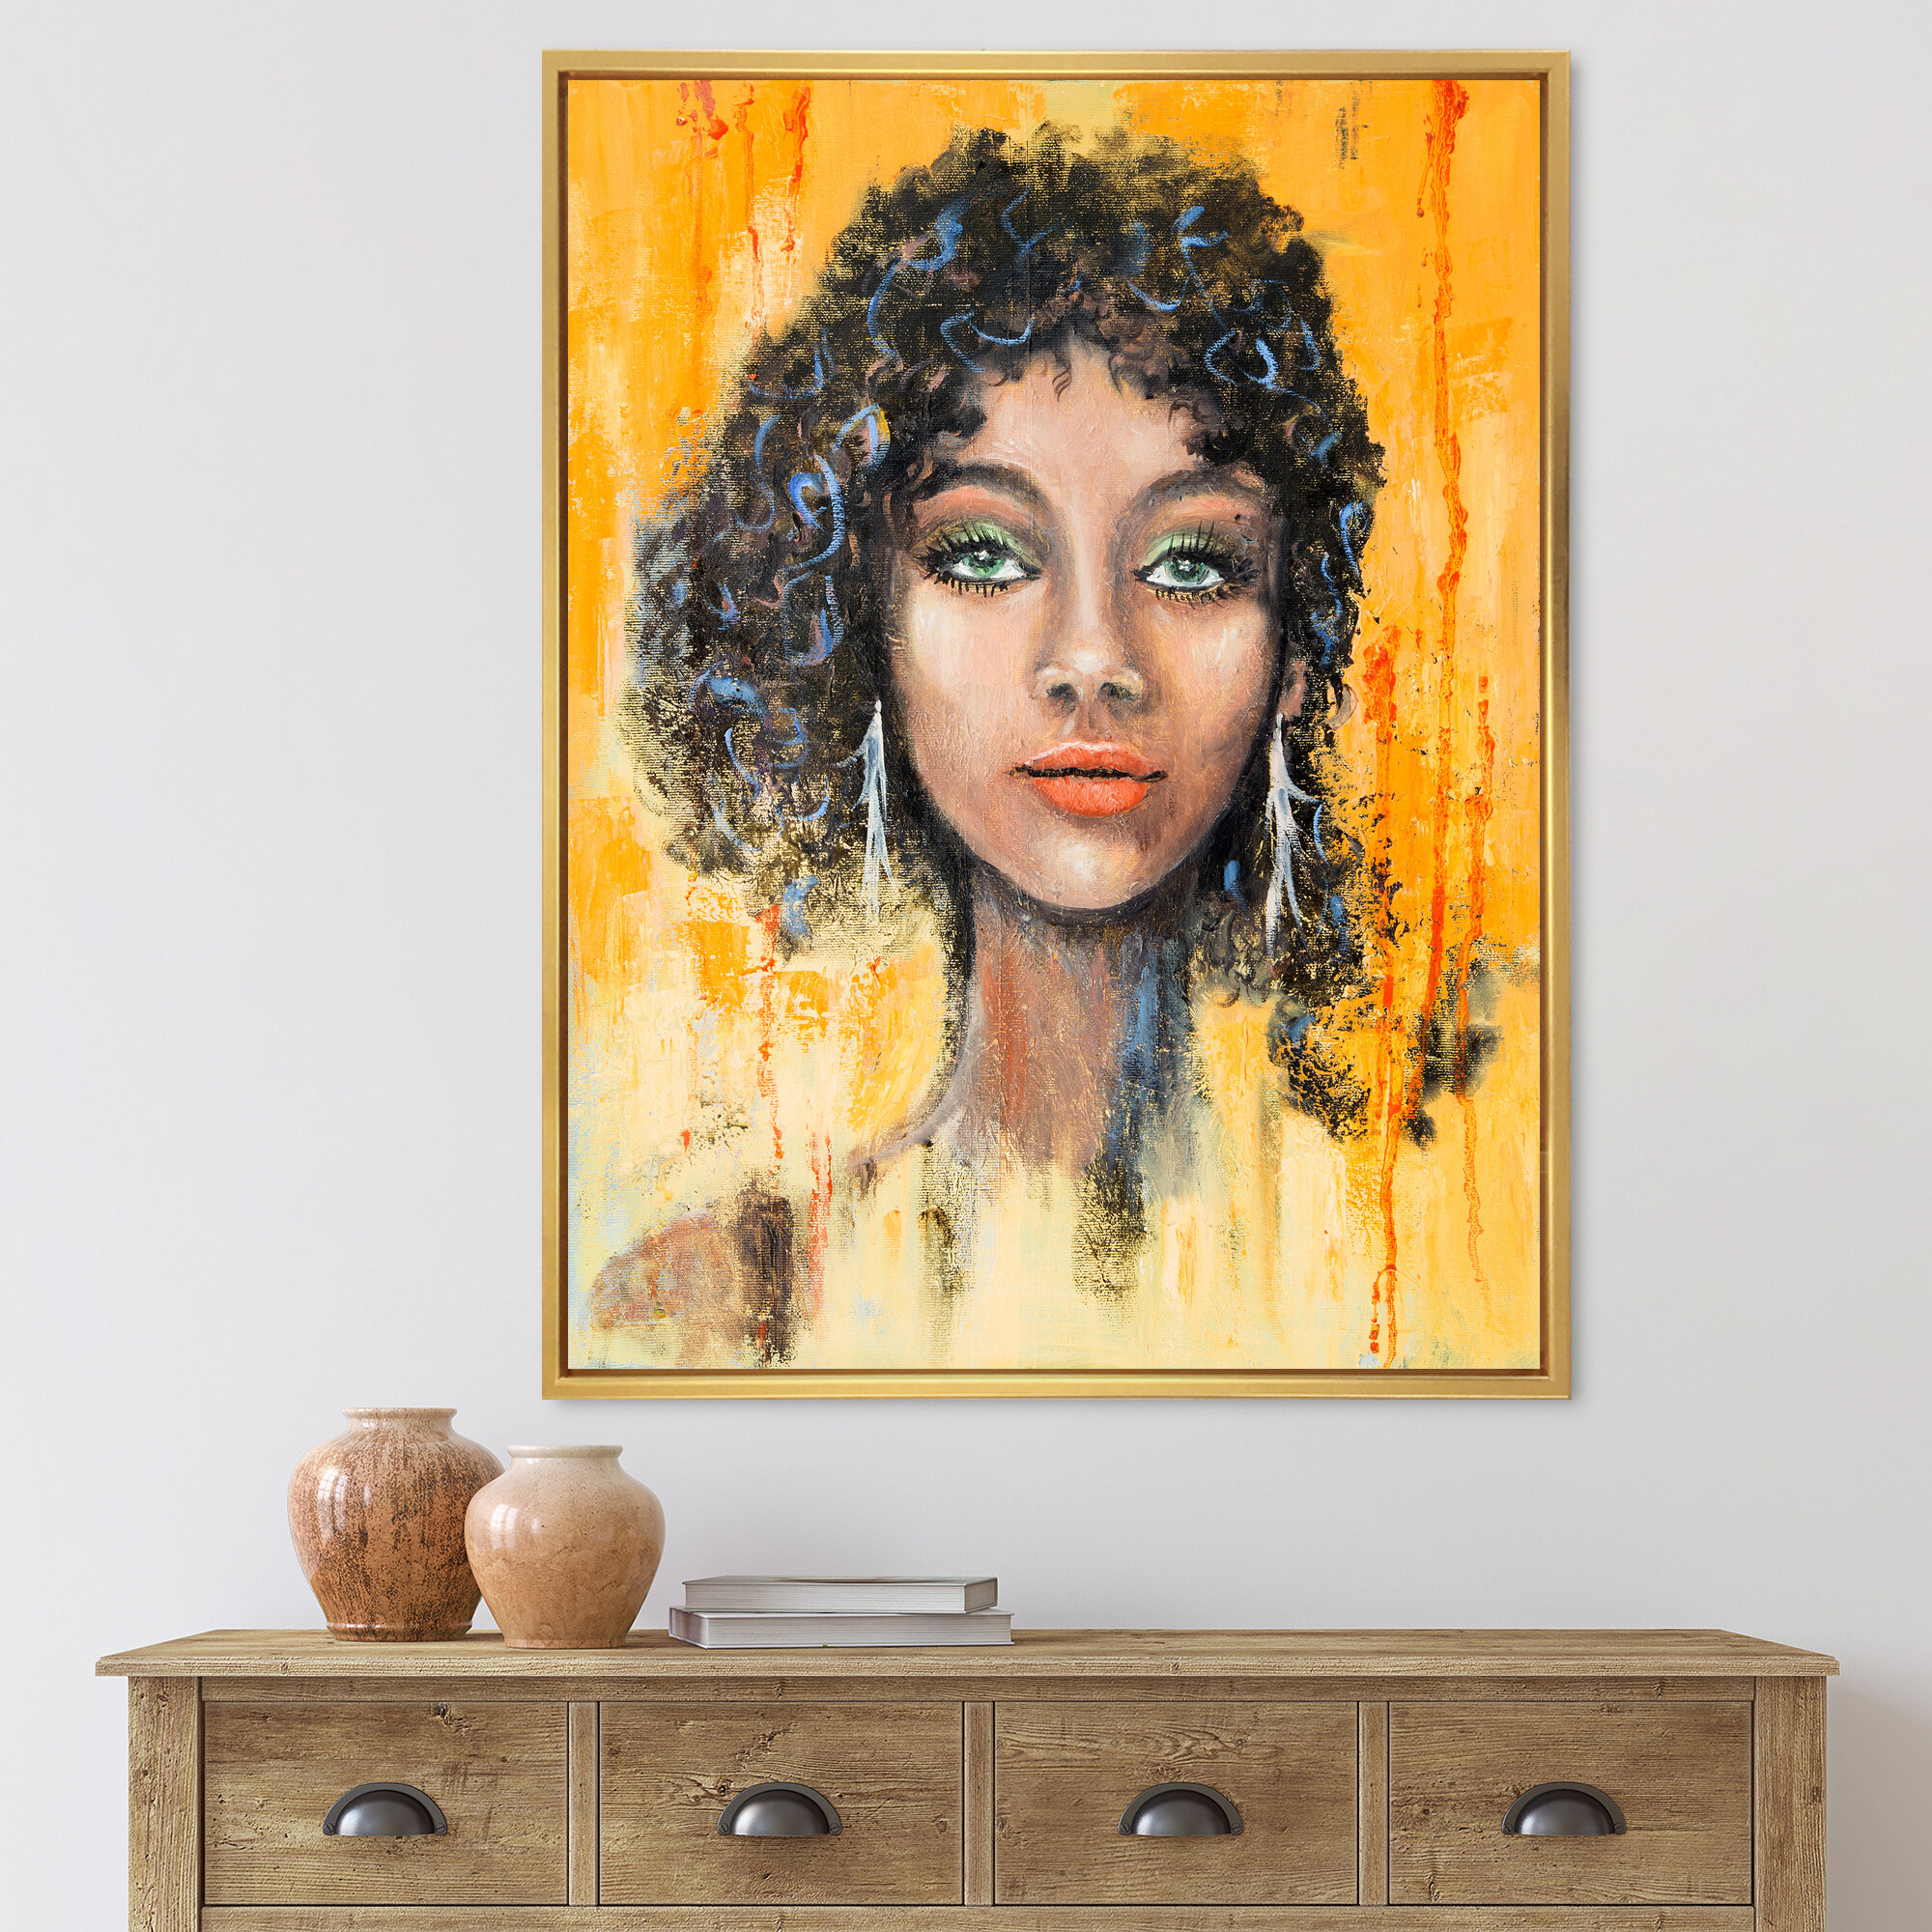 Bless international Woman Face With Green Eyes And Black Hair Impression  Framed On Canvas Painting Wayfair